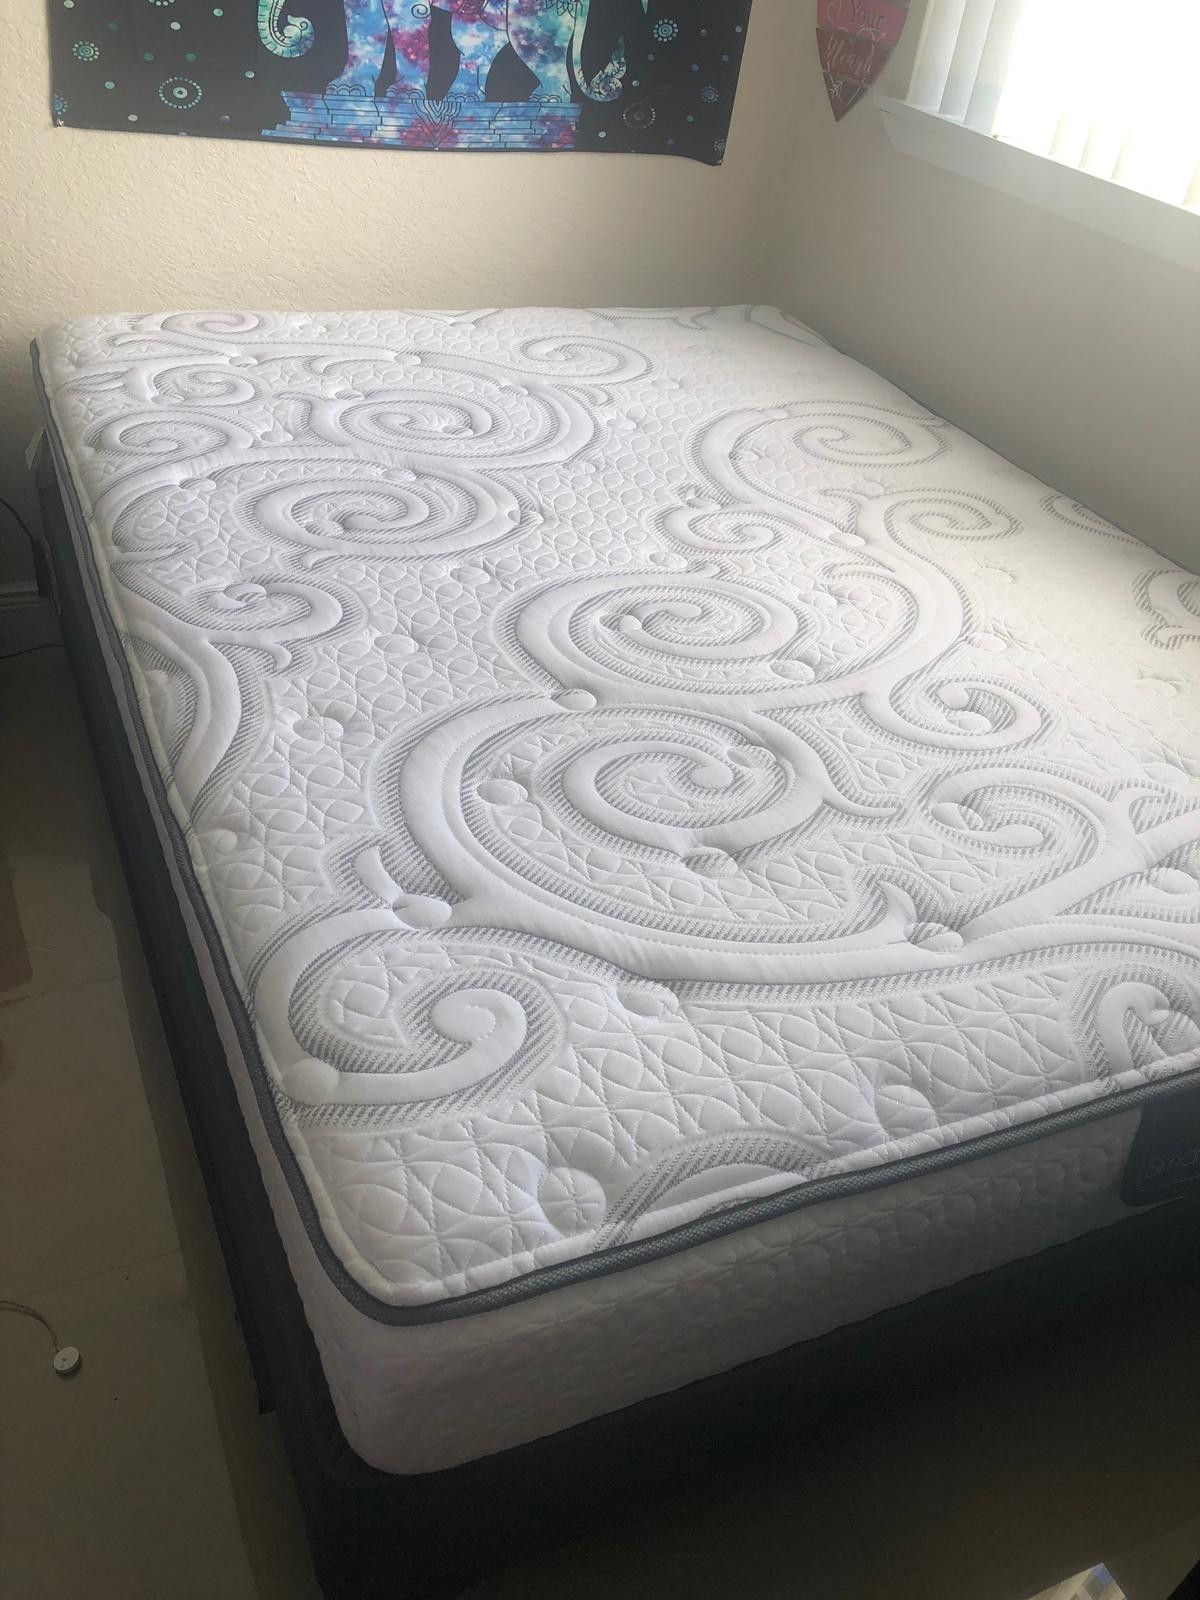 Mattress Used like new, Queen size